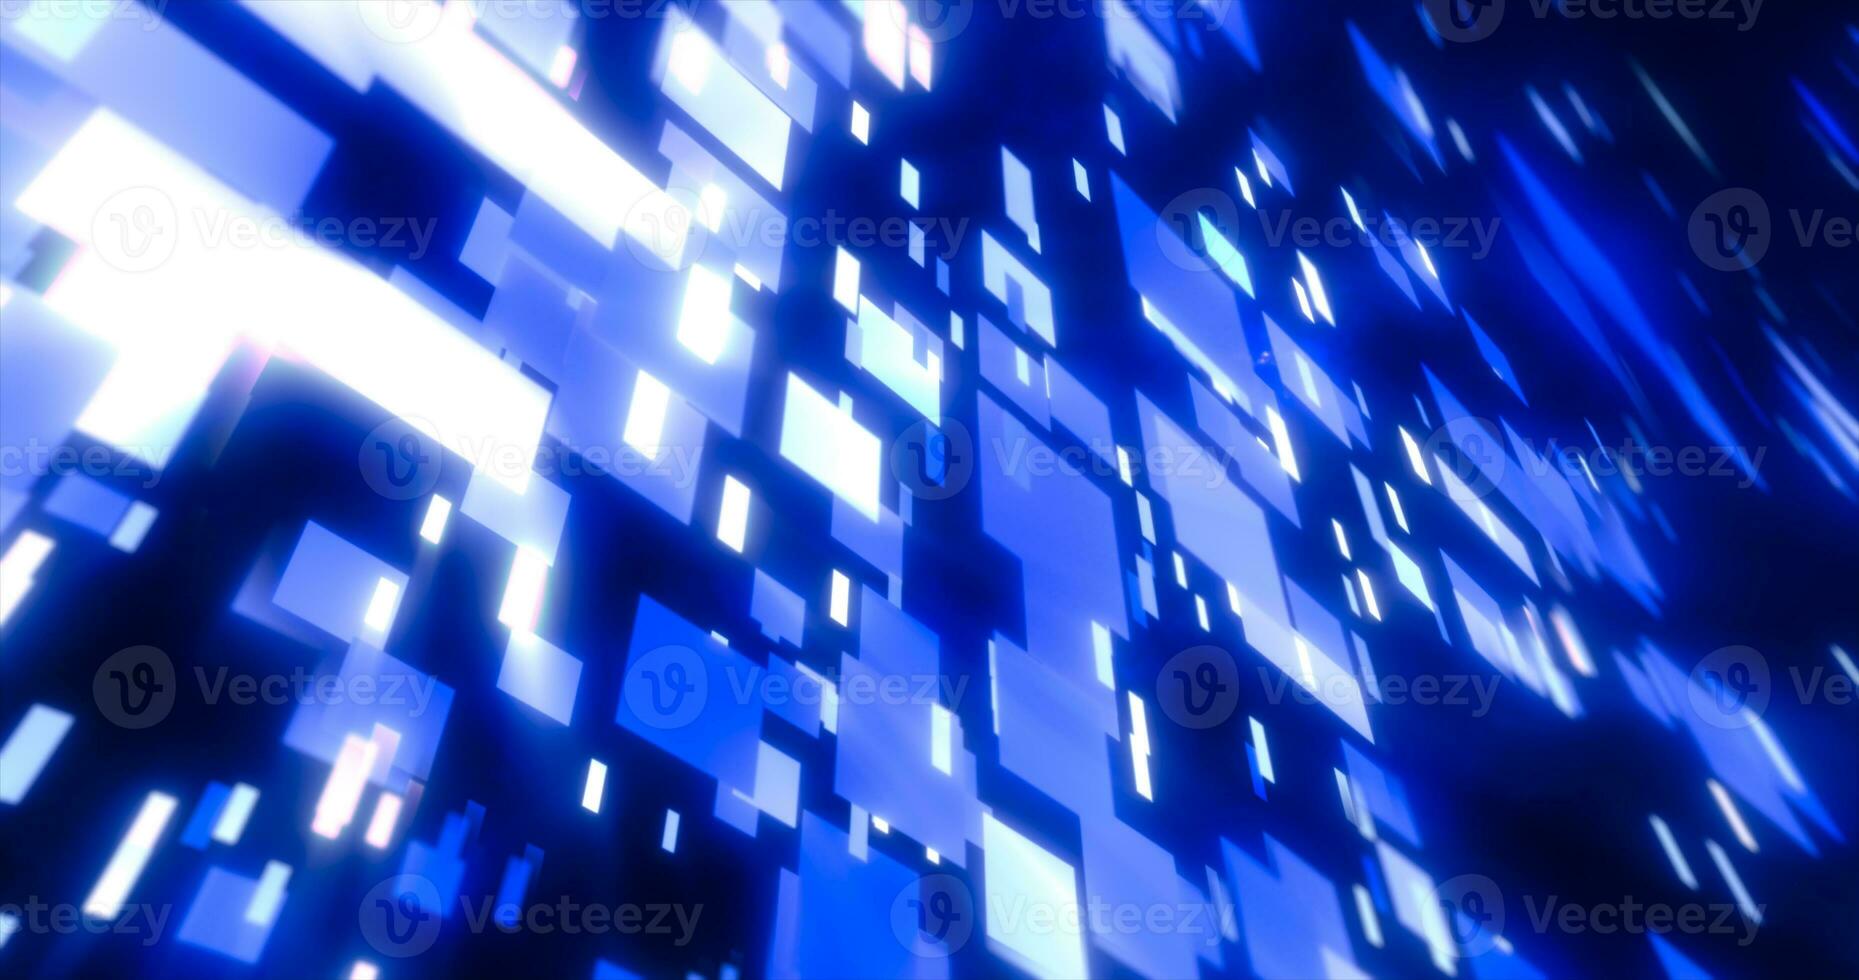 Blue energy squares and rectangles particles magic glowing hi-tech futuristic abstract background photo